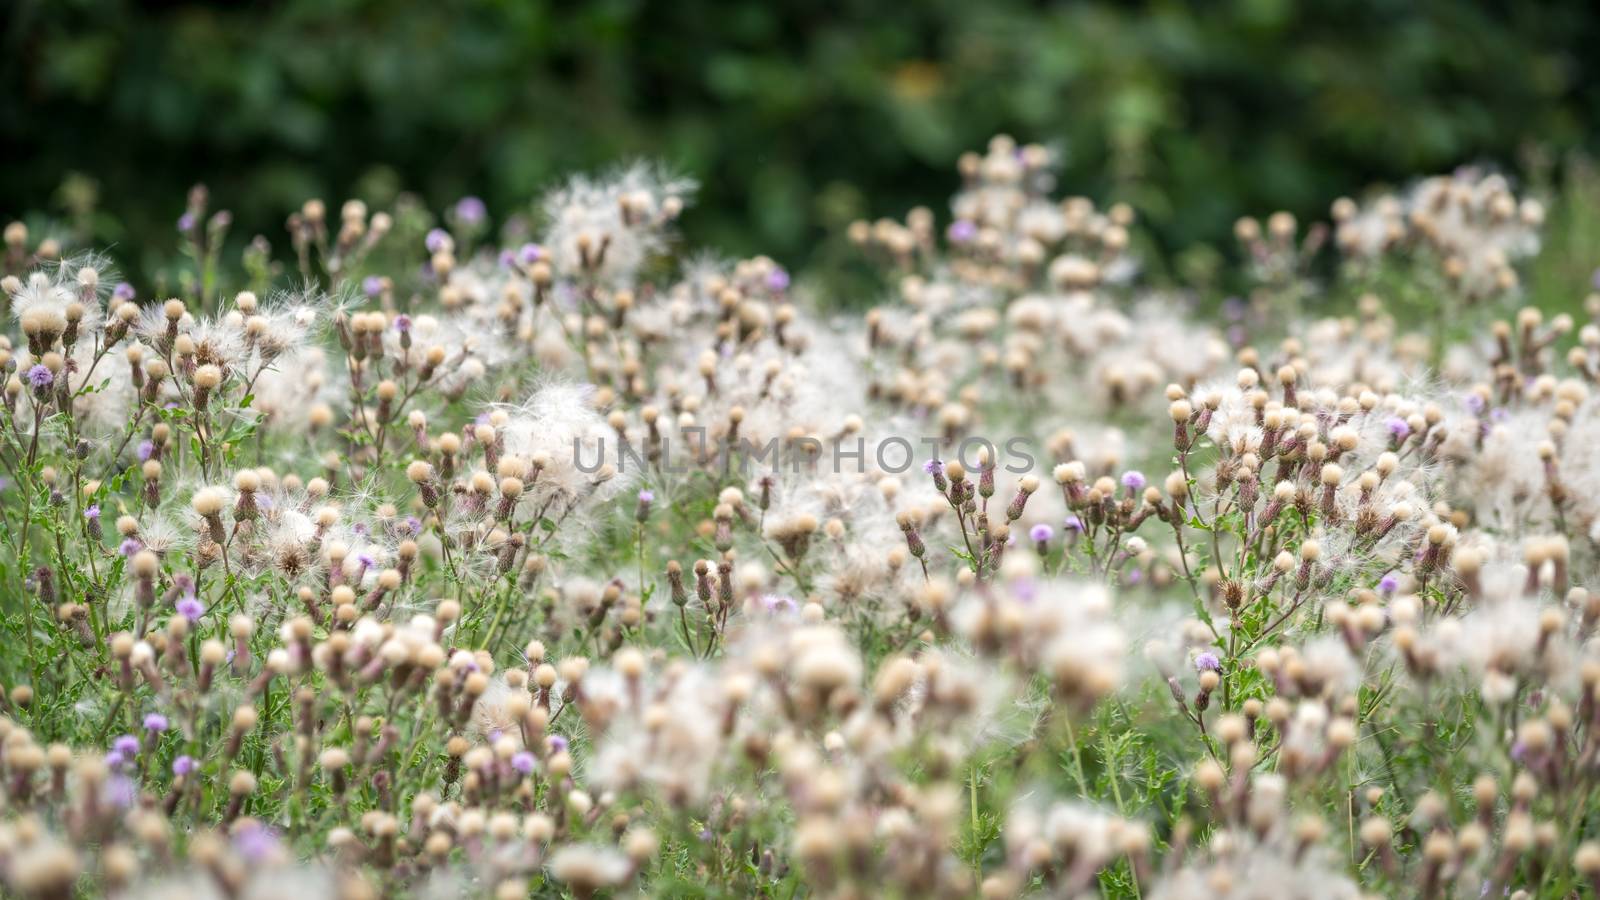 Masses of seeds being produced by Melancholy Thistles (Cirsium h by phil_bird